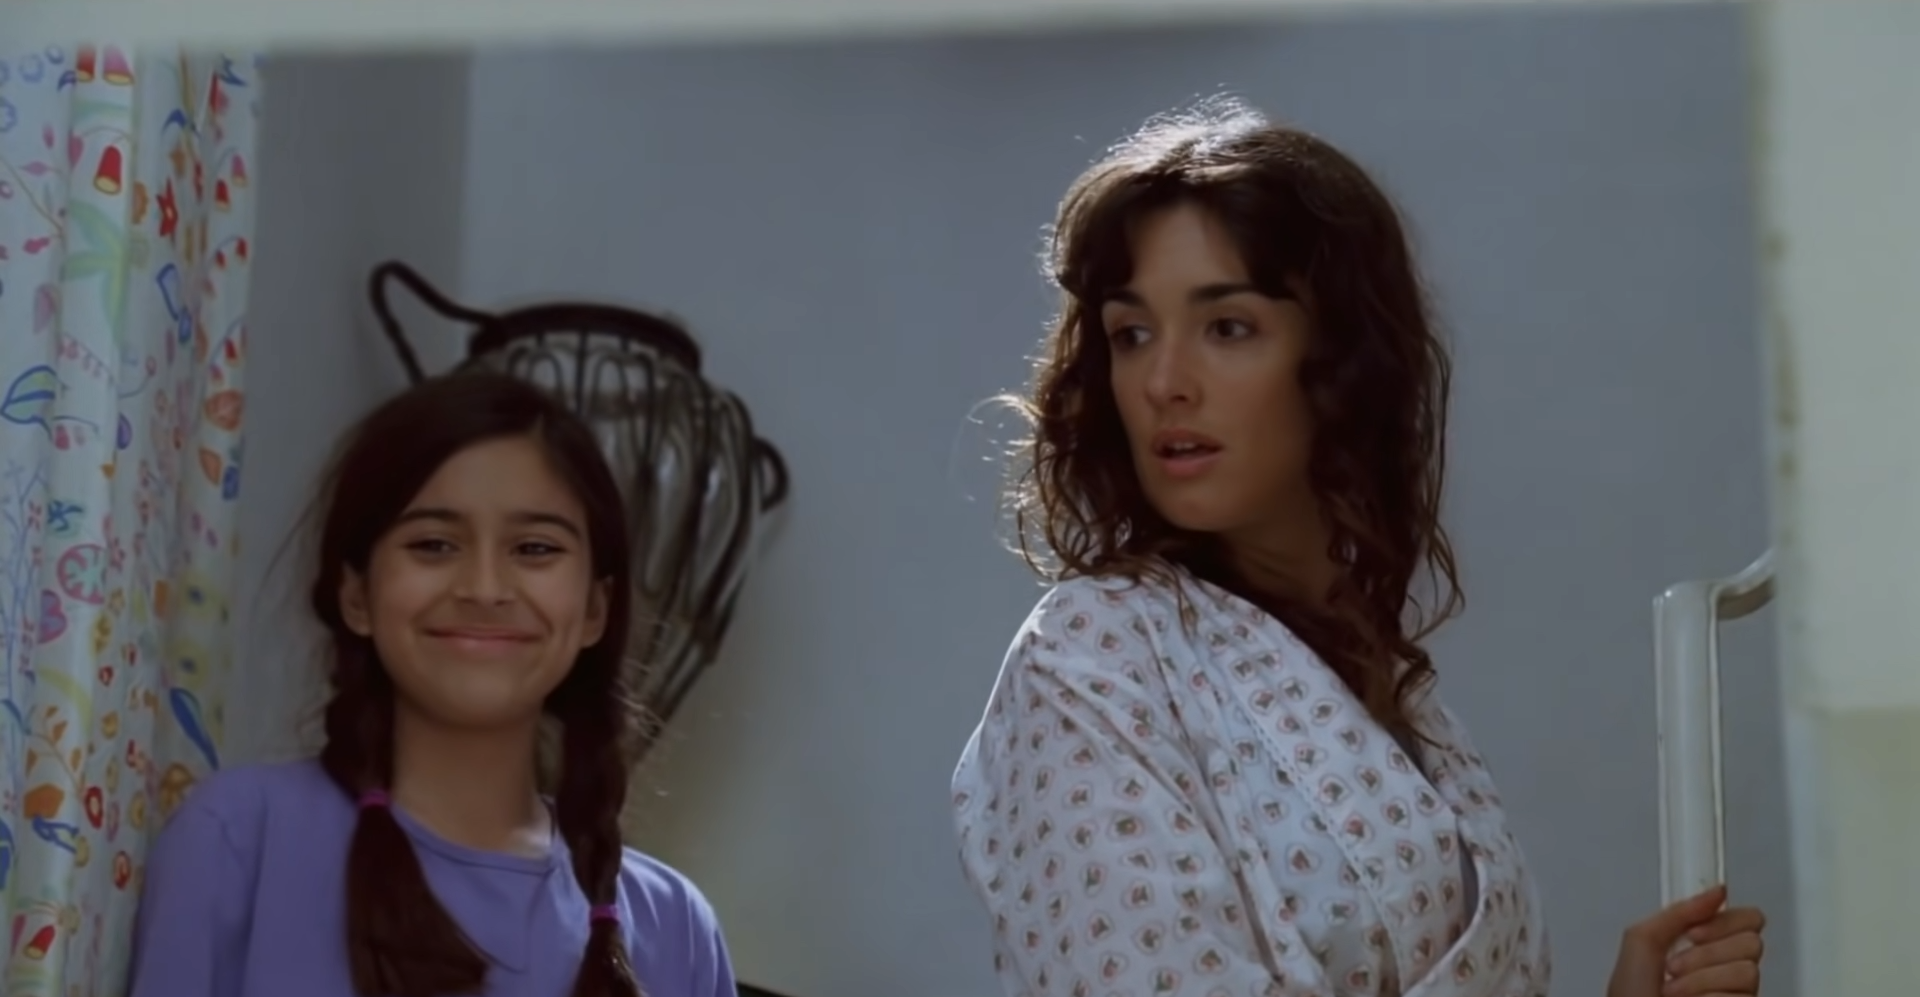 Flor&#x27;s daughter from the movie &quot;Spanglish&quot; is translating for her